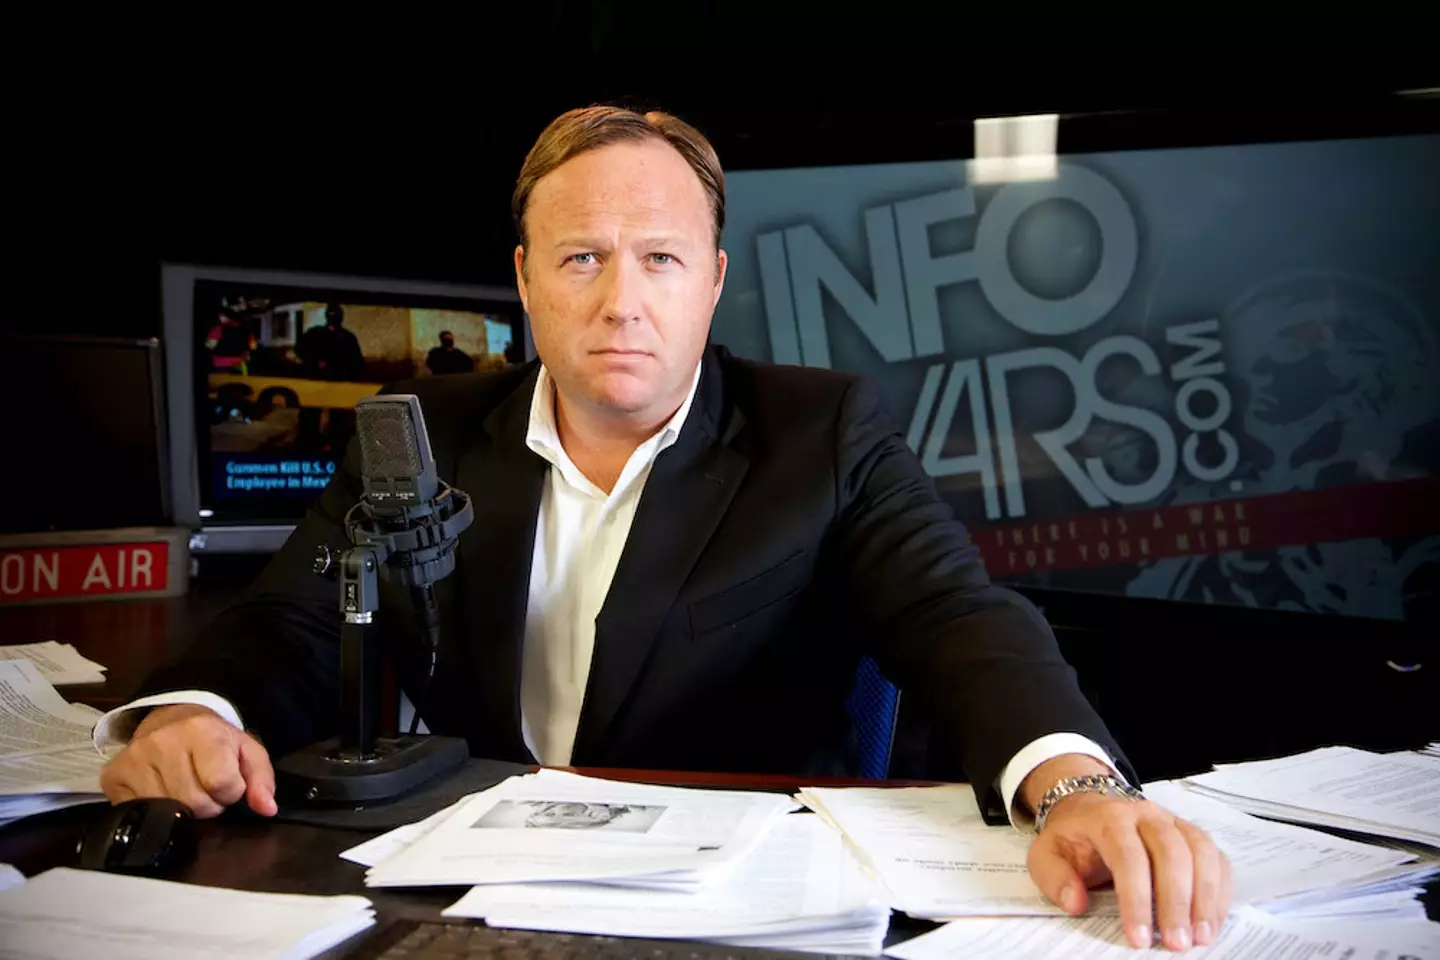 The InfoWars host was found guilty by default of defamation.